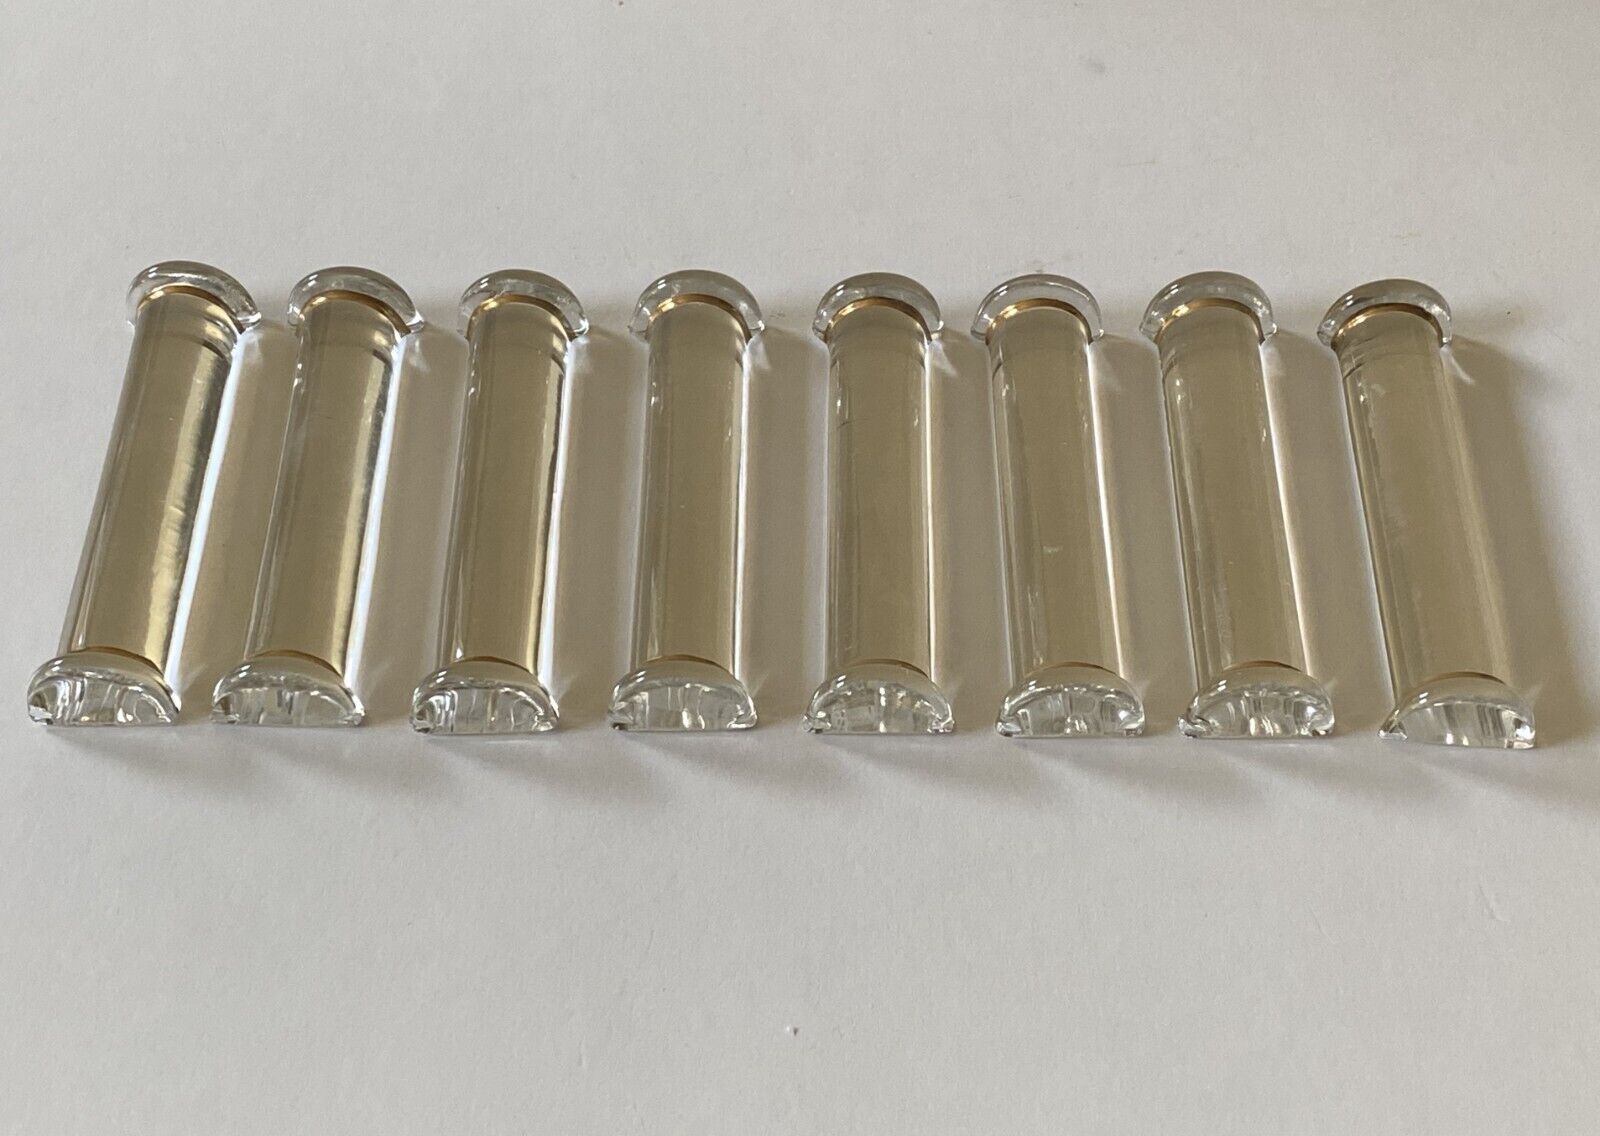 QTY 8 VINTAGE CRYSTAL GLASS KNIFE RESTS AND/OR UTENSIL RESTS WITH GOLD TRIM RARE